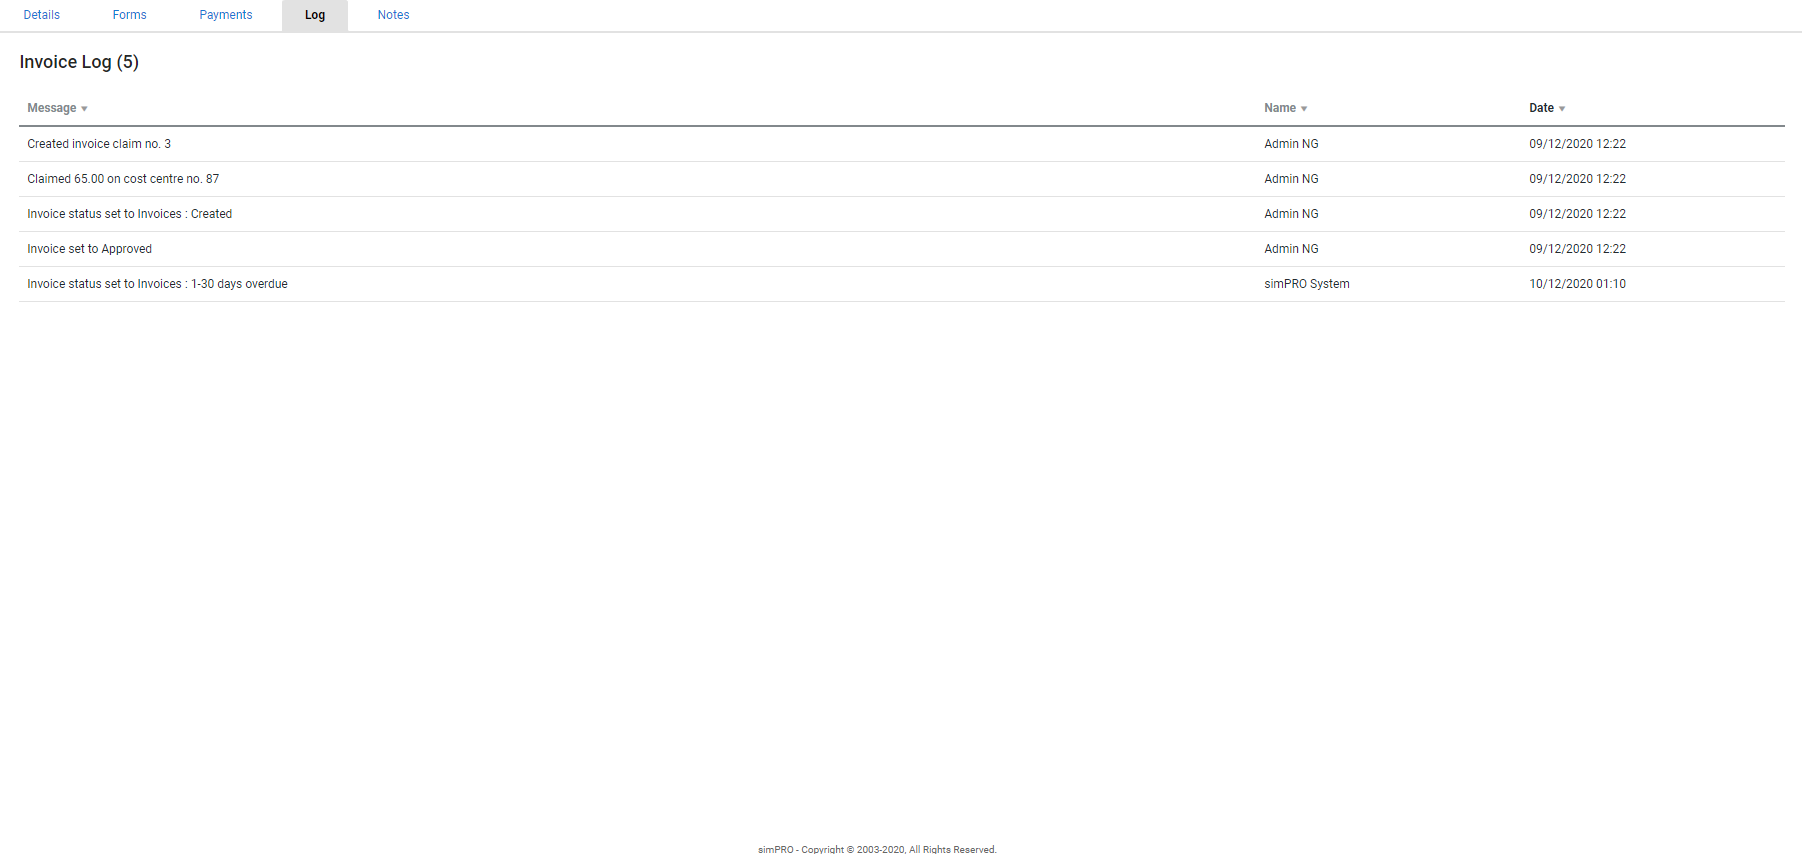 A screenshot of the invoice log table.